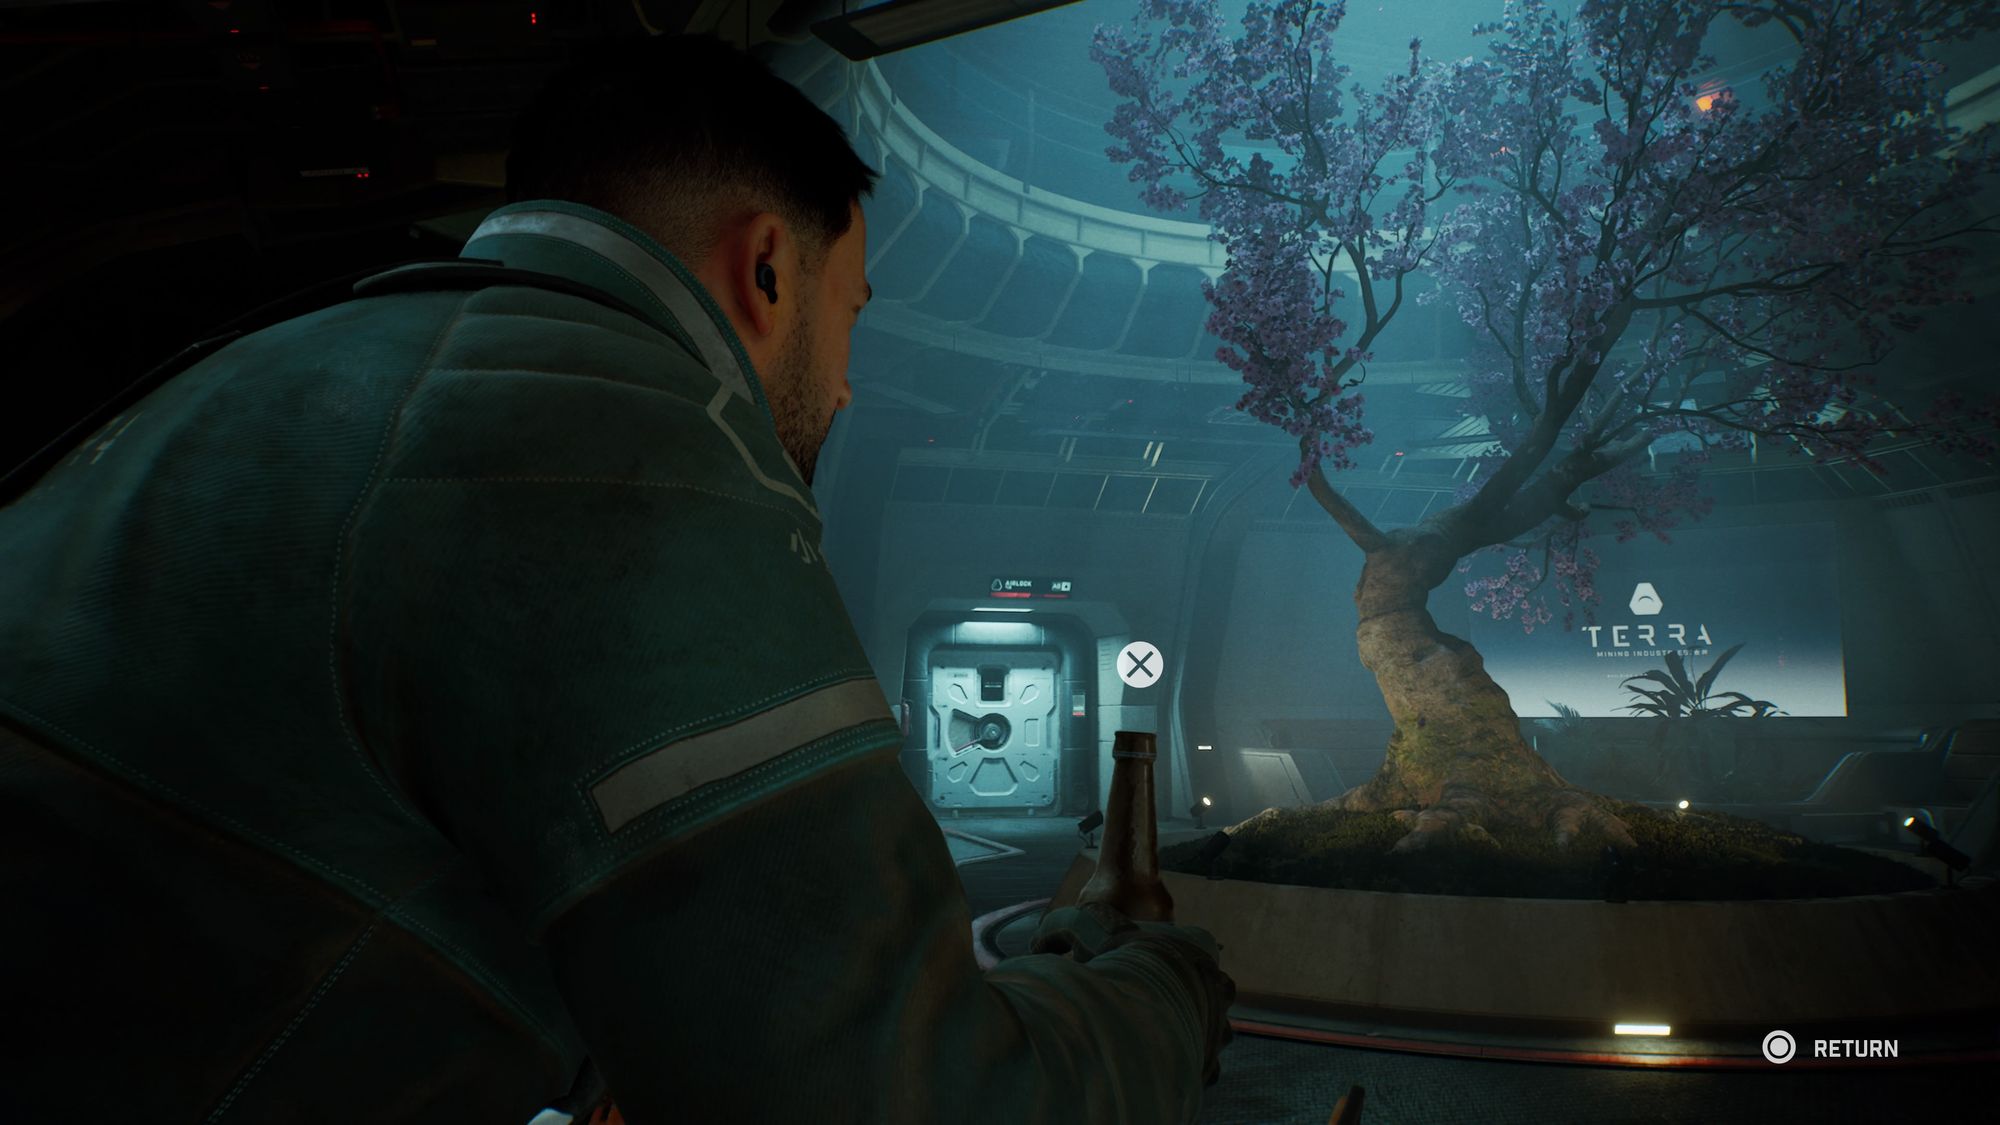 The protagonist of Fort Solis, Jack Leary, having a drink in the abandoned station.